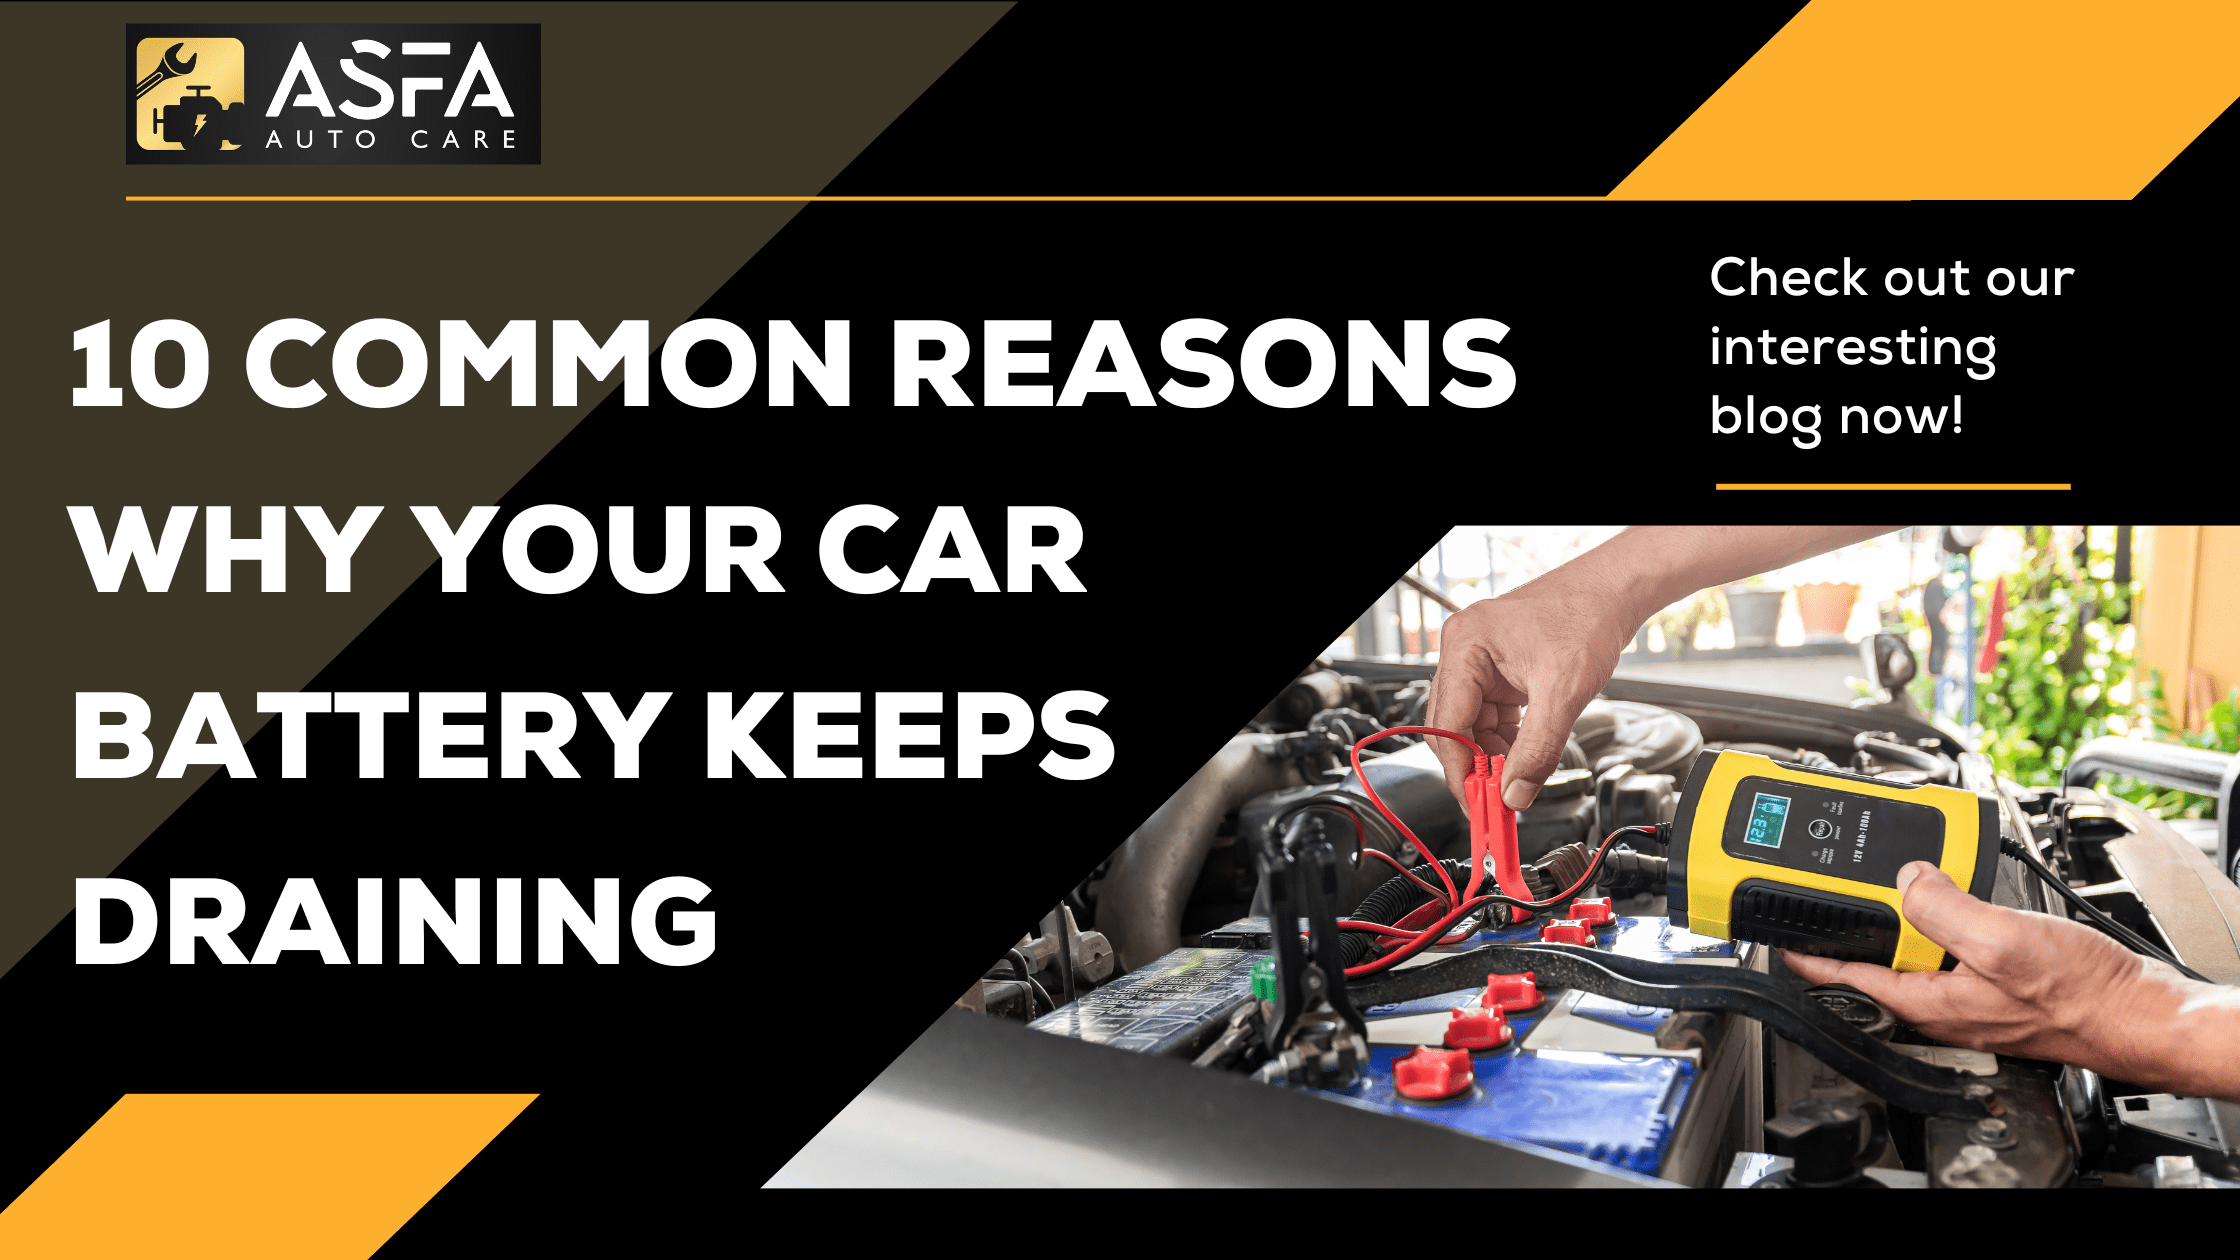 10 Common Reasons Why Your Car Battery Keeps Draining